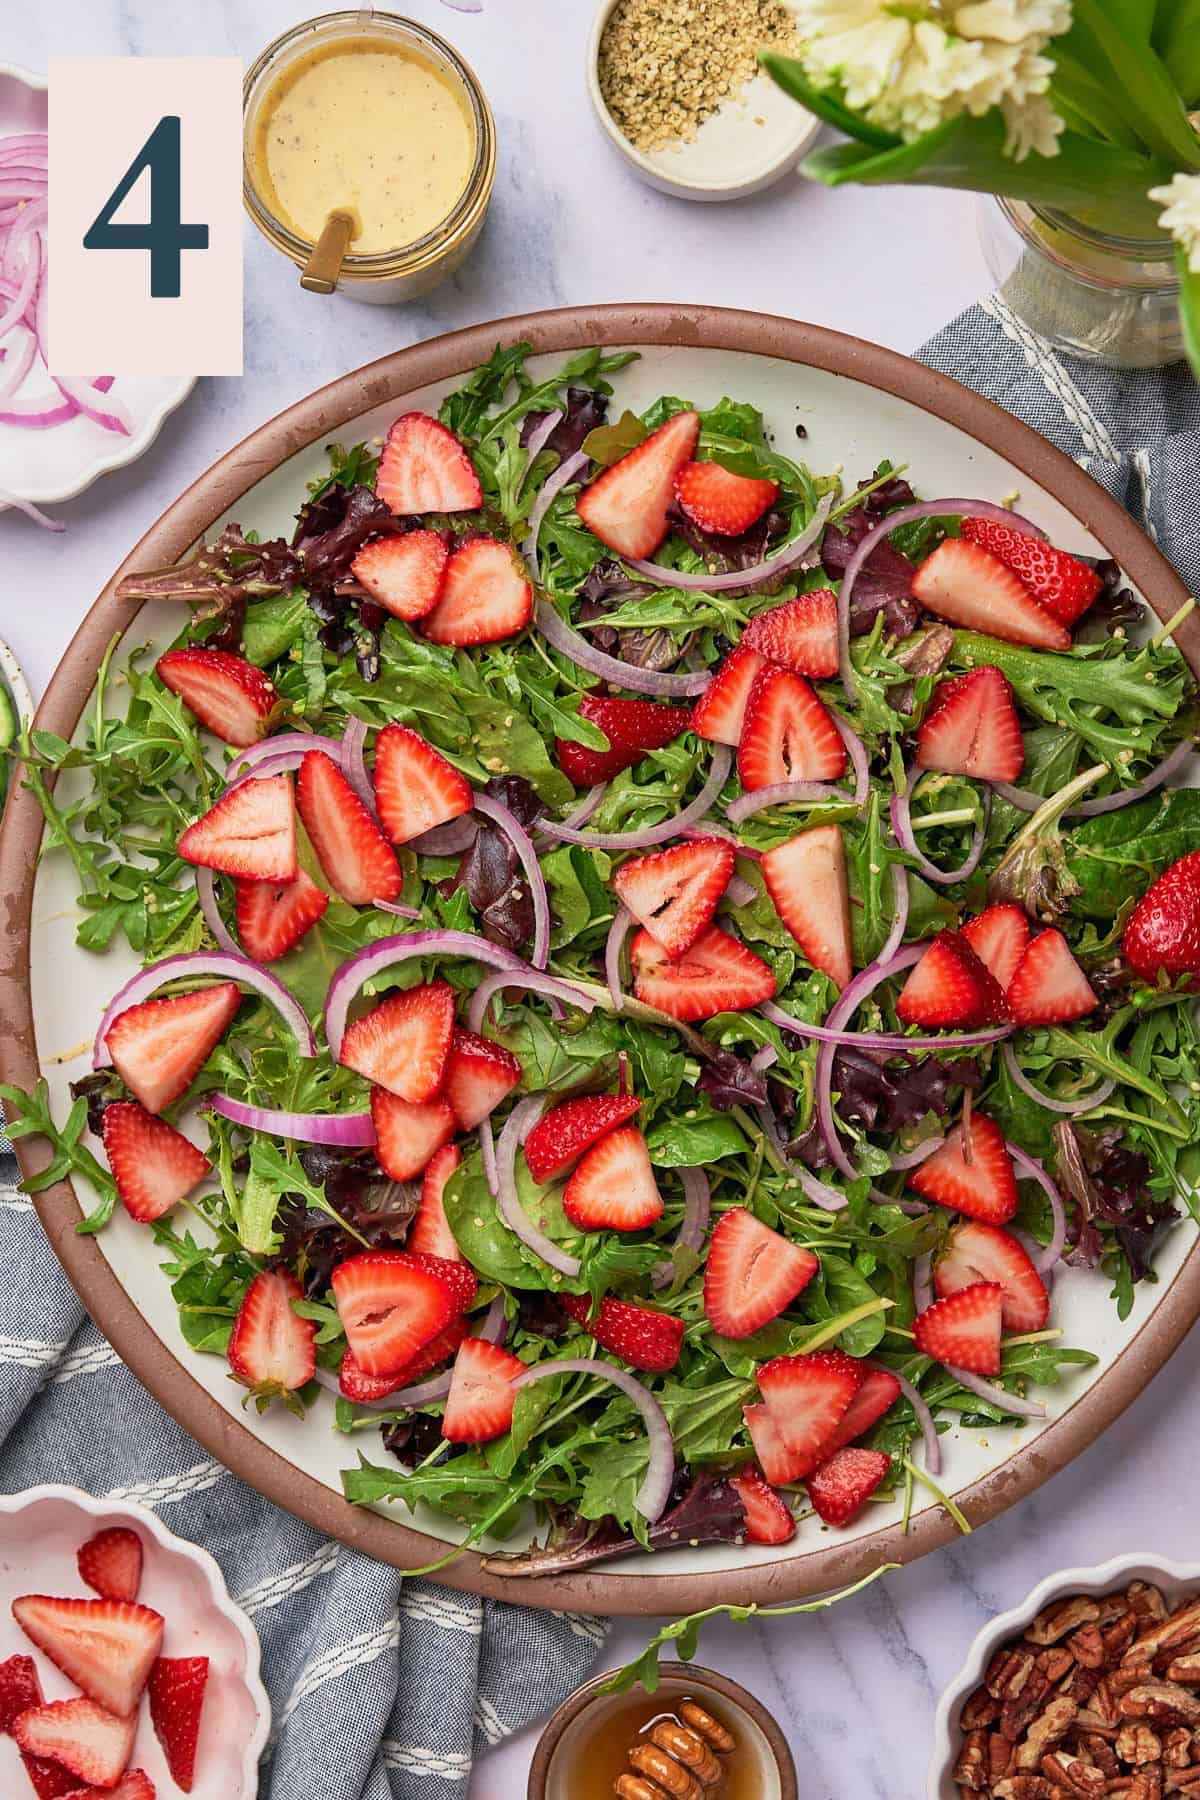 Arugula salad topped with strawberry halves.